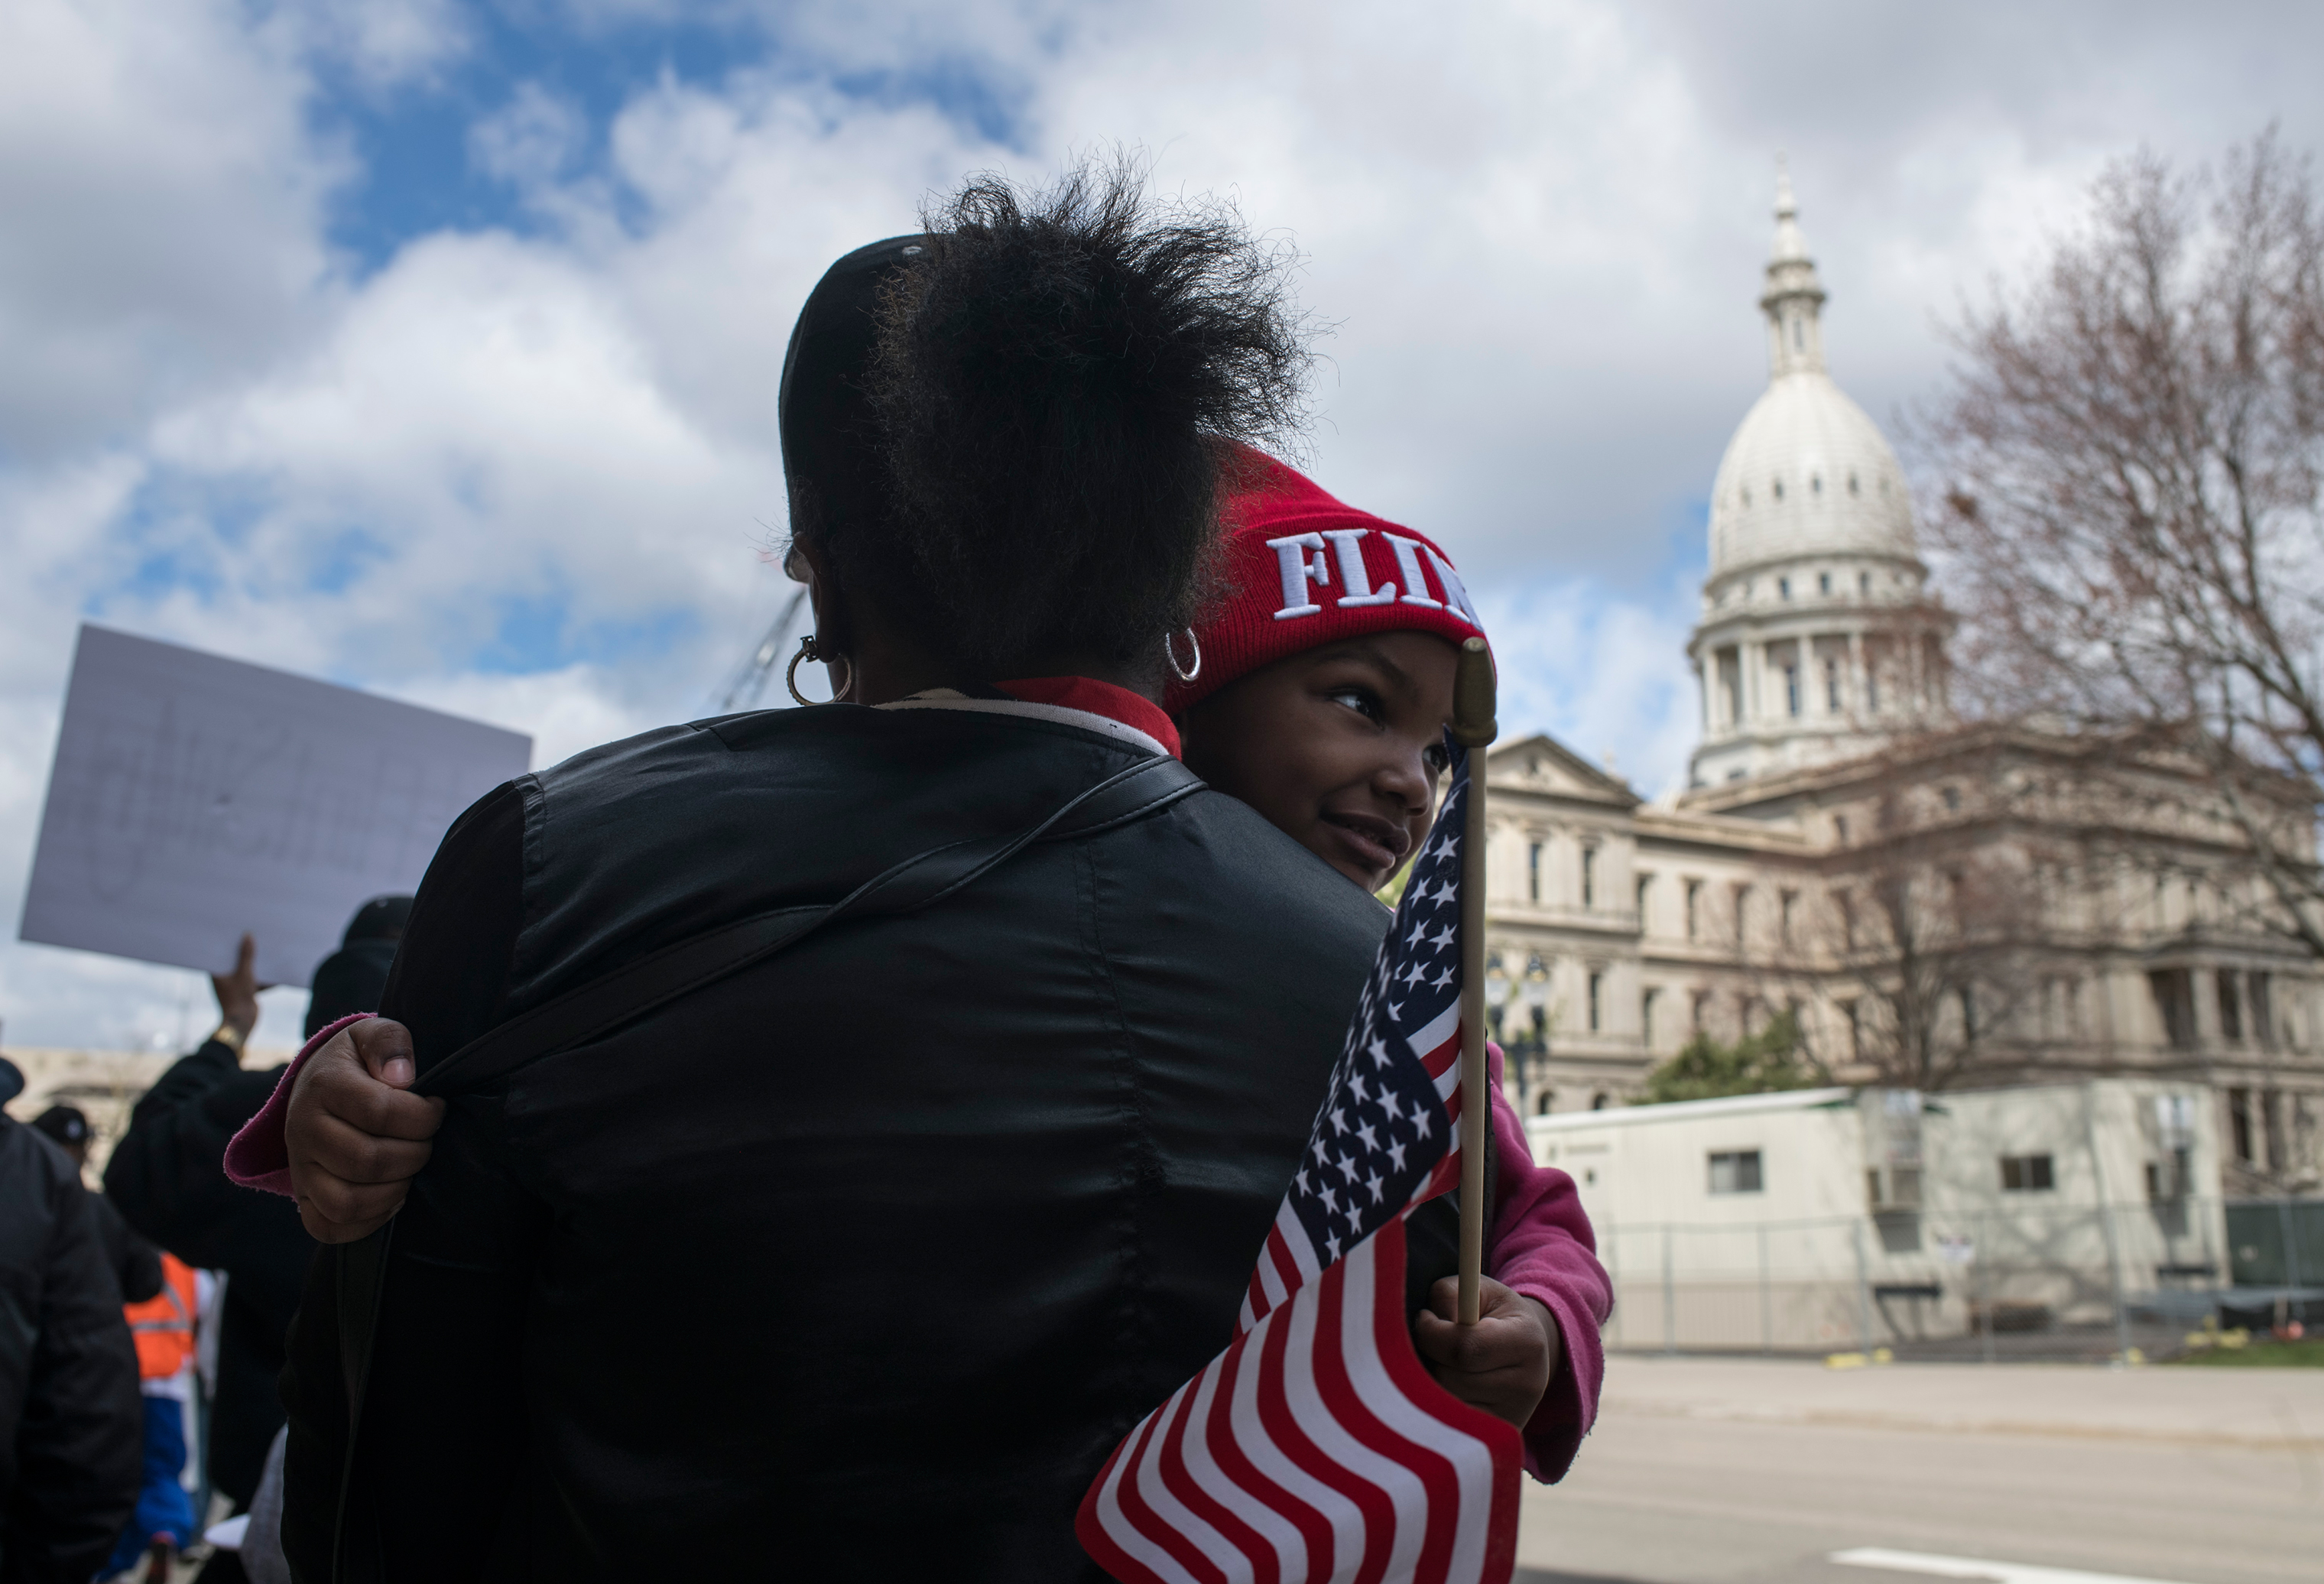 On the fourth anniversary of the water switch that caused the lead pollution, Hawk and daughter Aliana joined other Flint residents last year protesting at the Michigan state capitol. (Brittany Greeson for TIME)